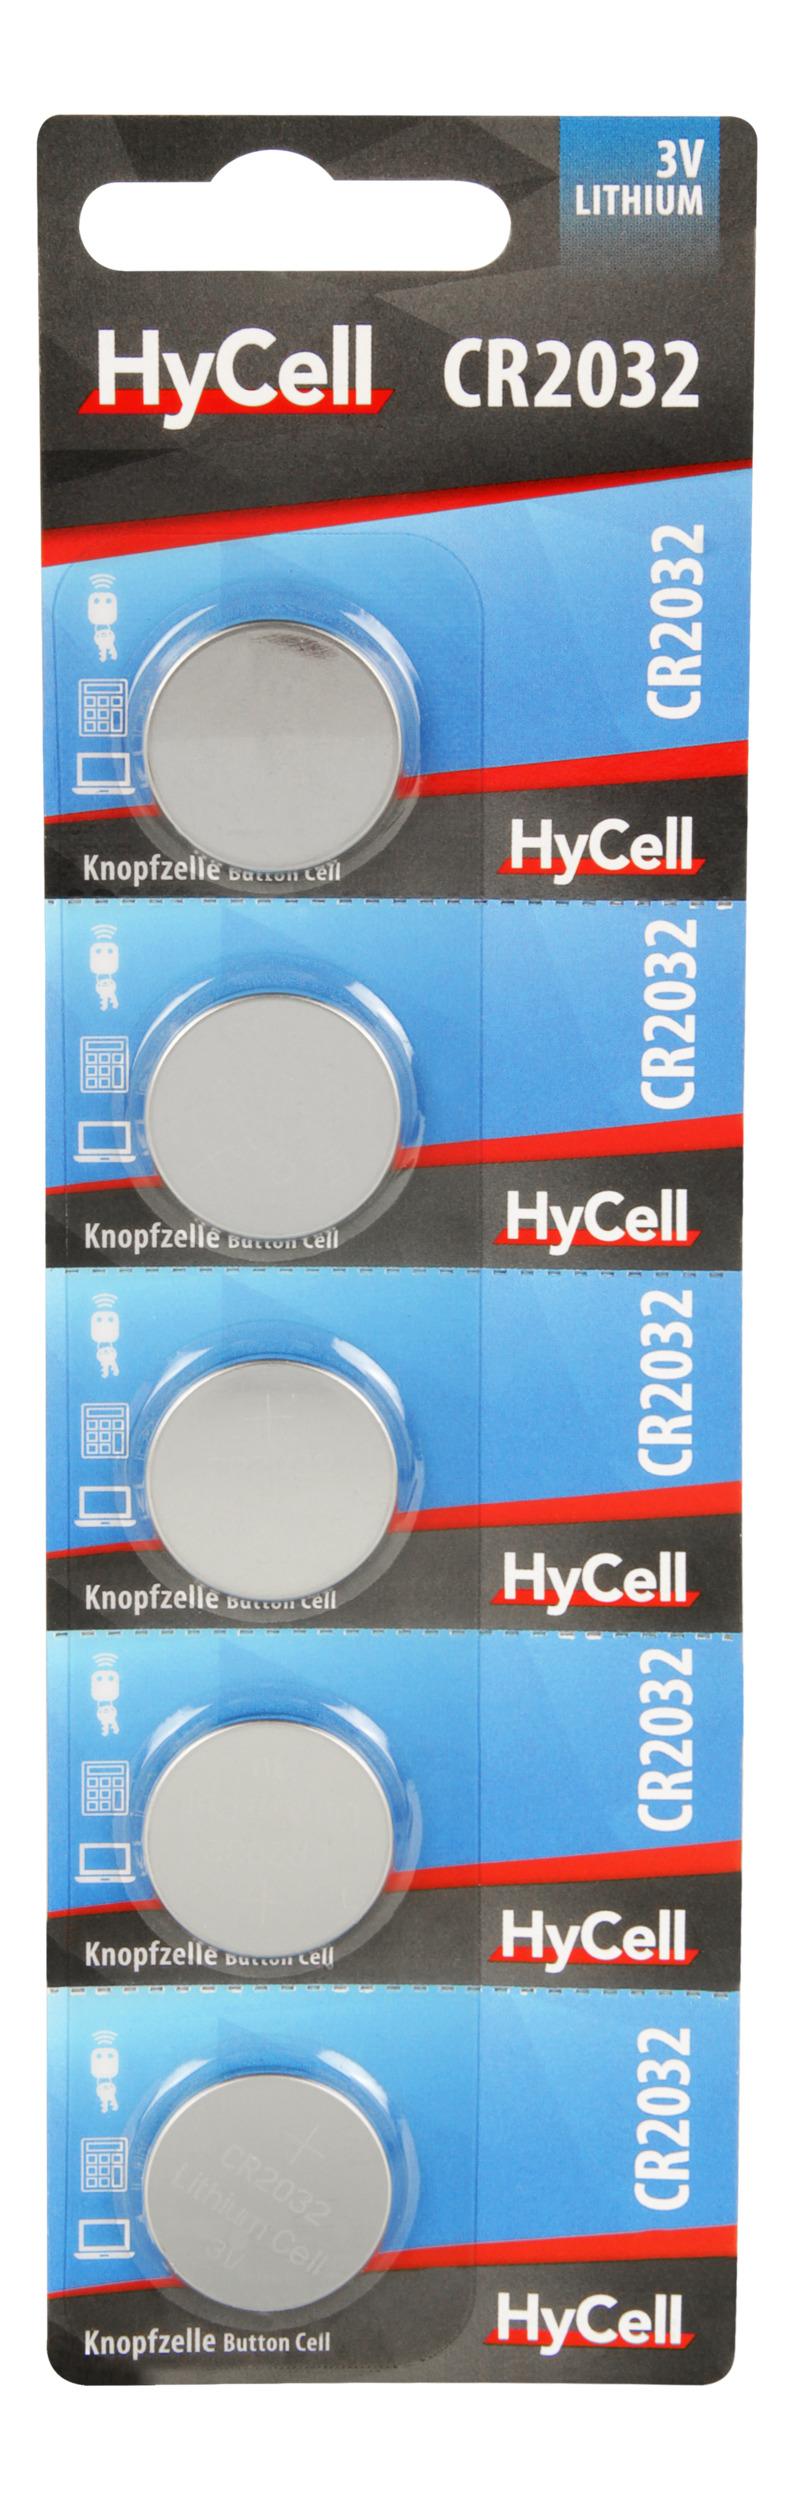 HyCell 5er CR2032 HyCell Lithium Knopfz.